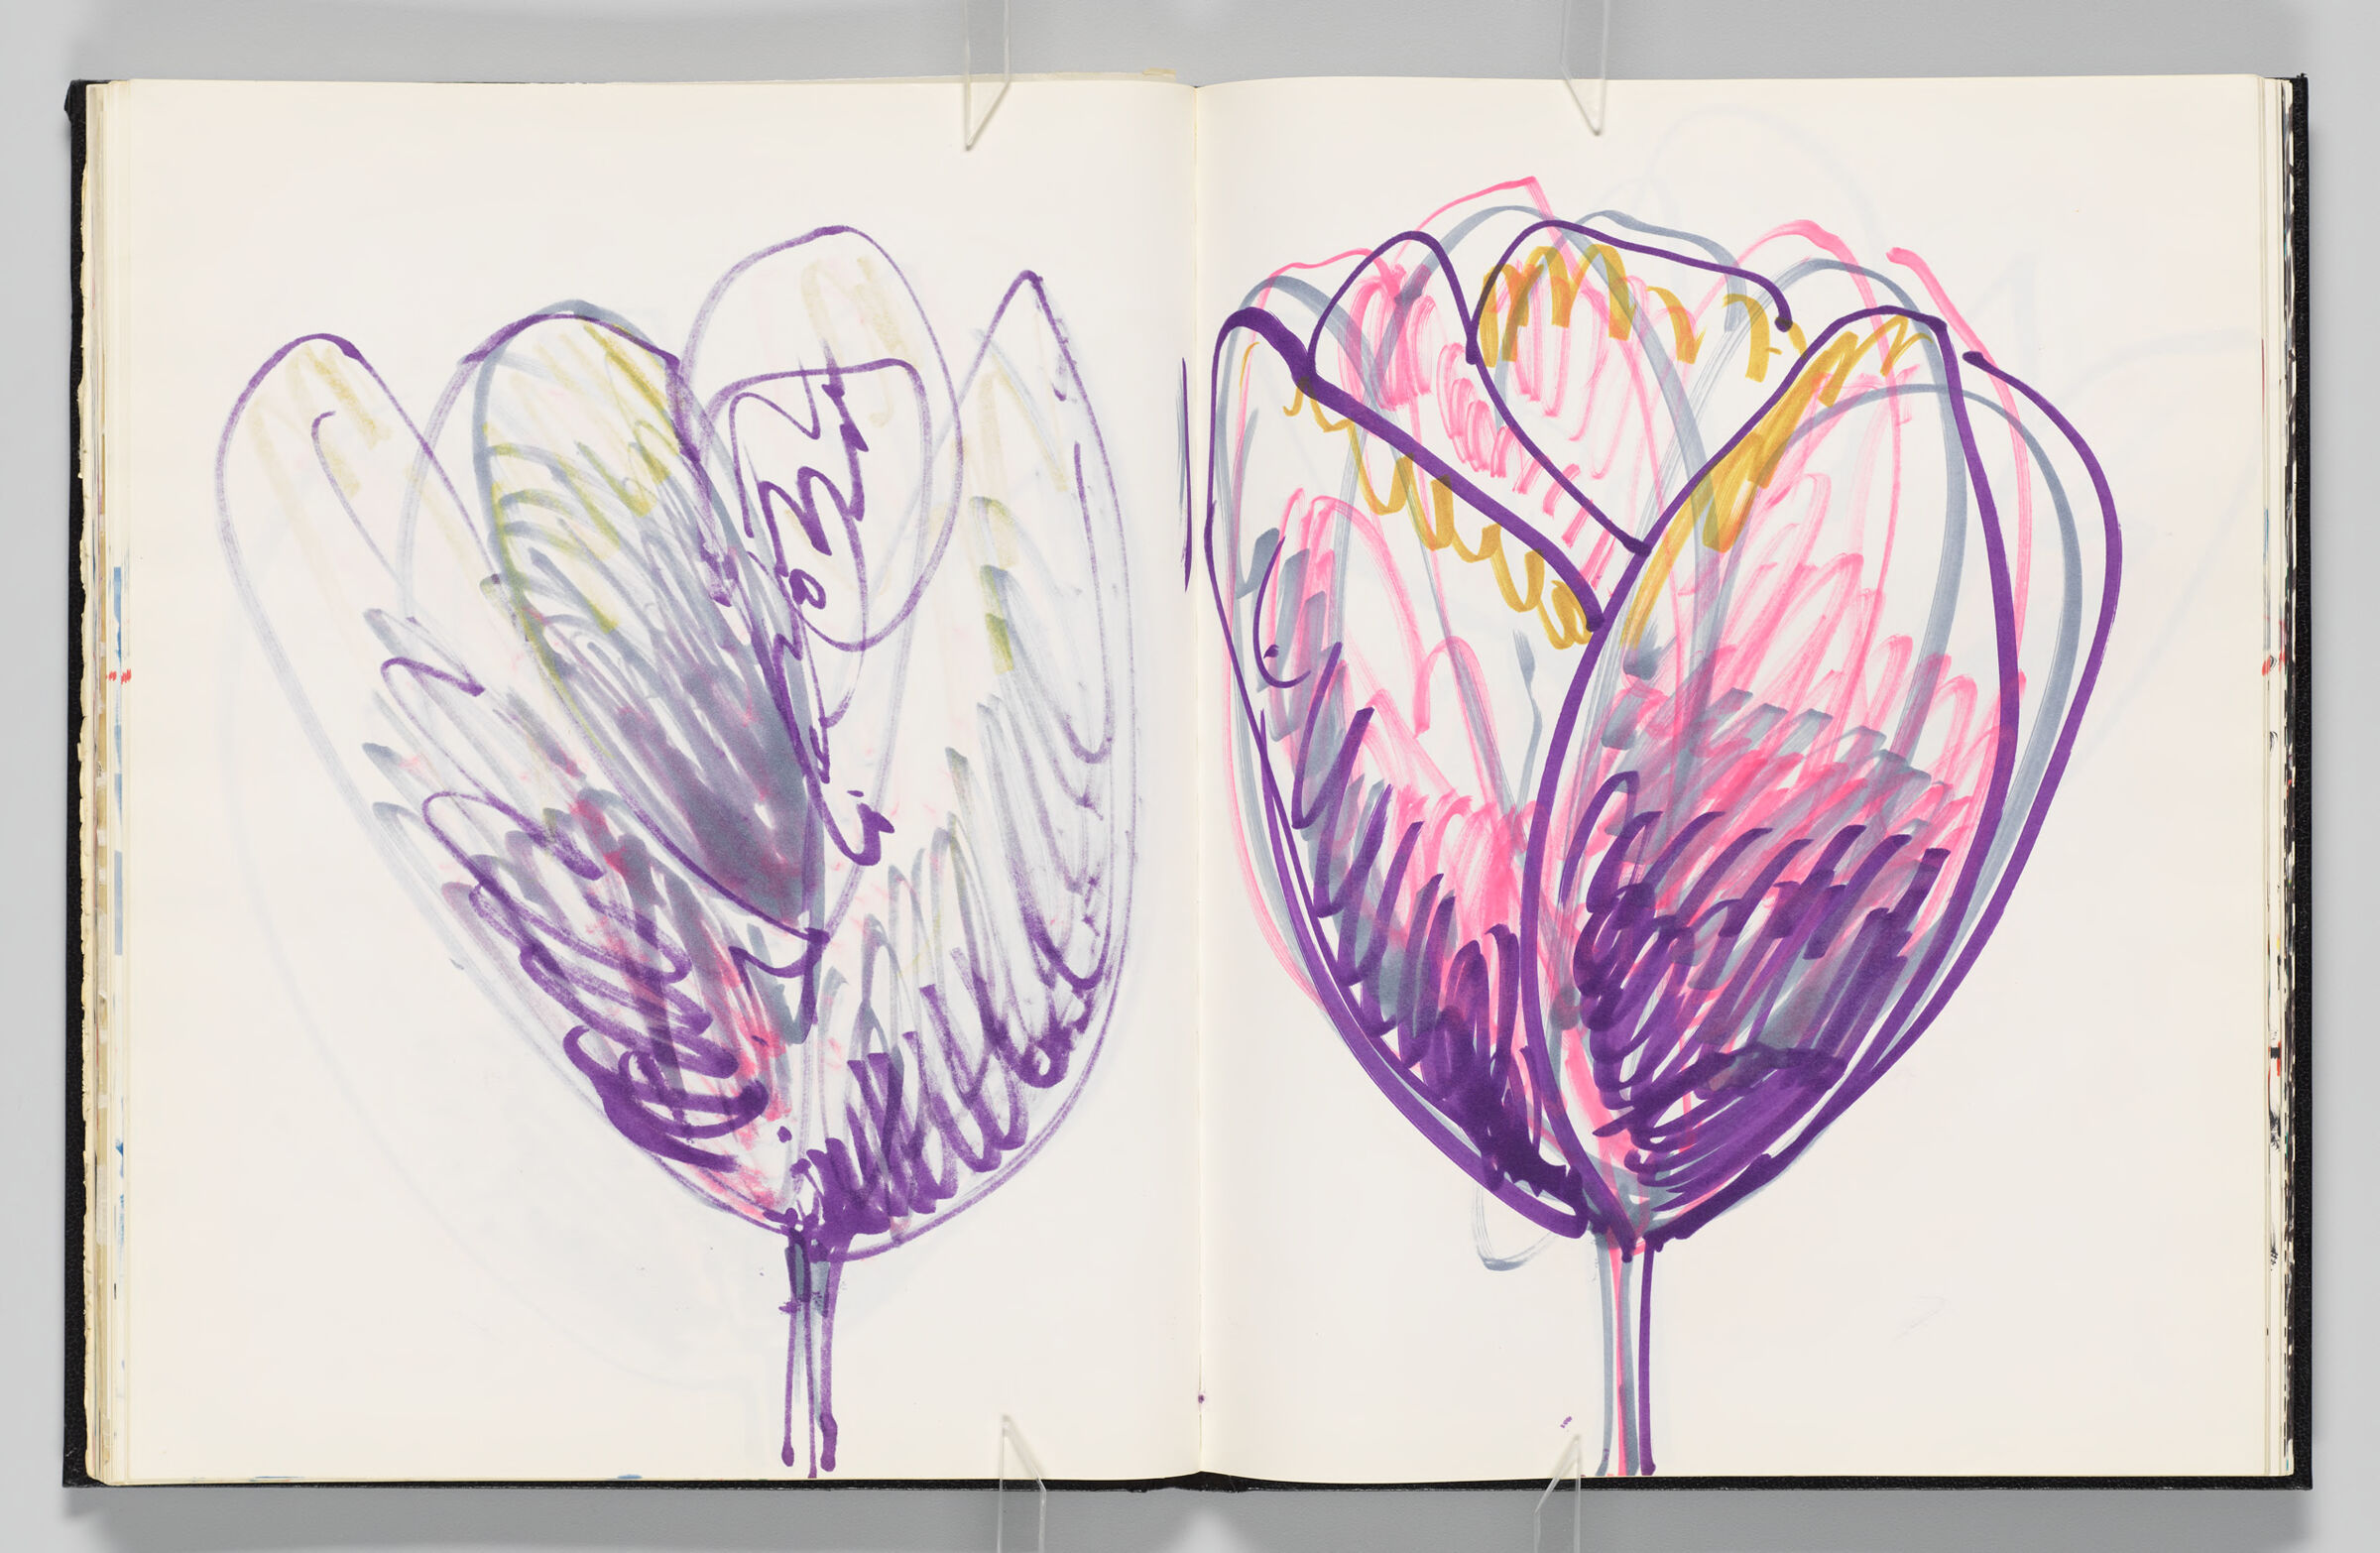 Untitled (Bleed-Through Of Previous Page, Left Page); Untitled (Magnolia, Right Page)